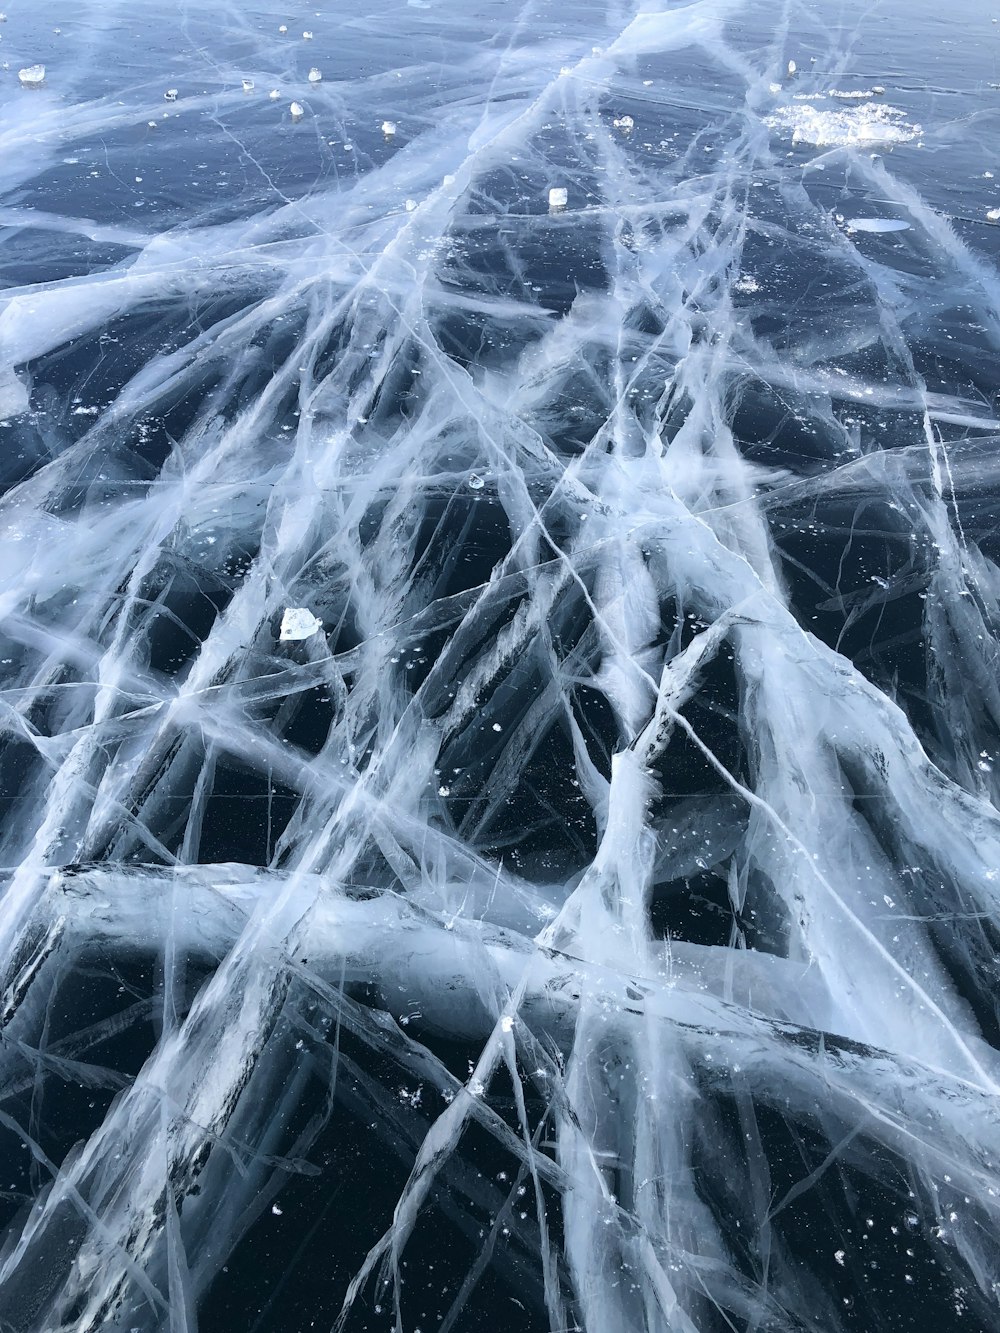 a view of the ice from an airplane window